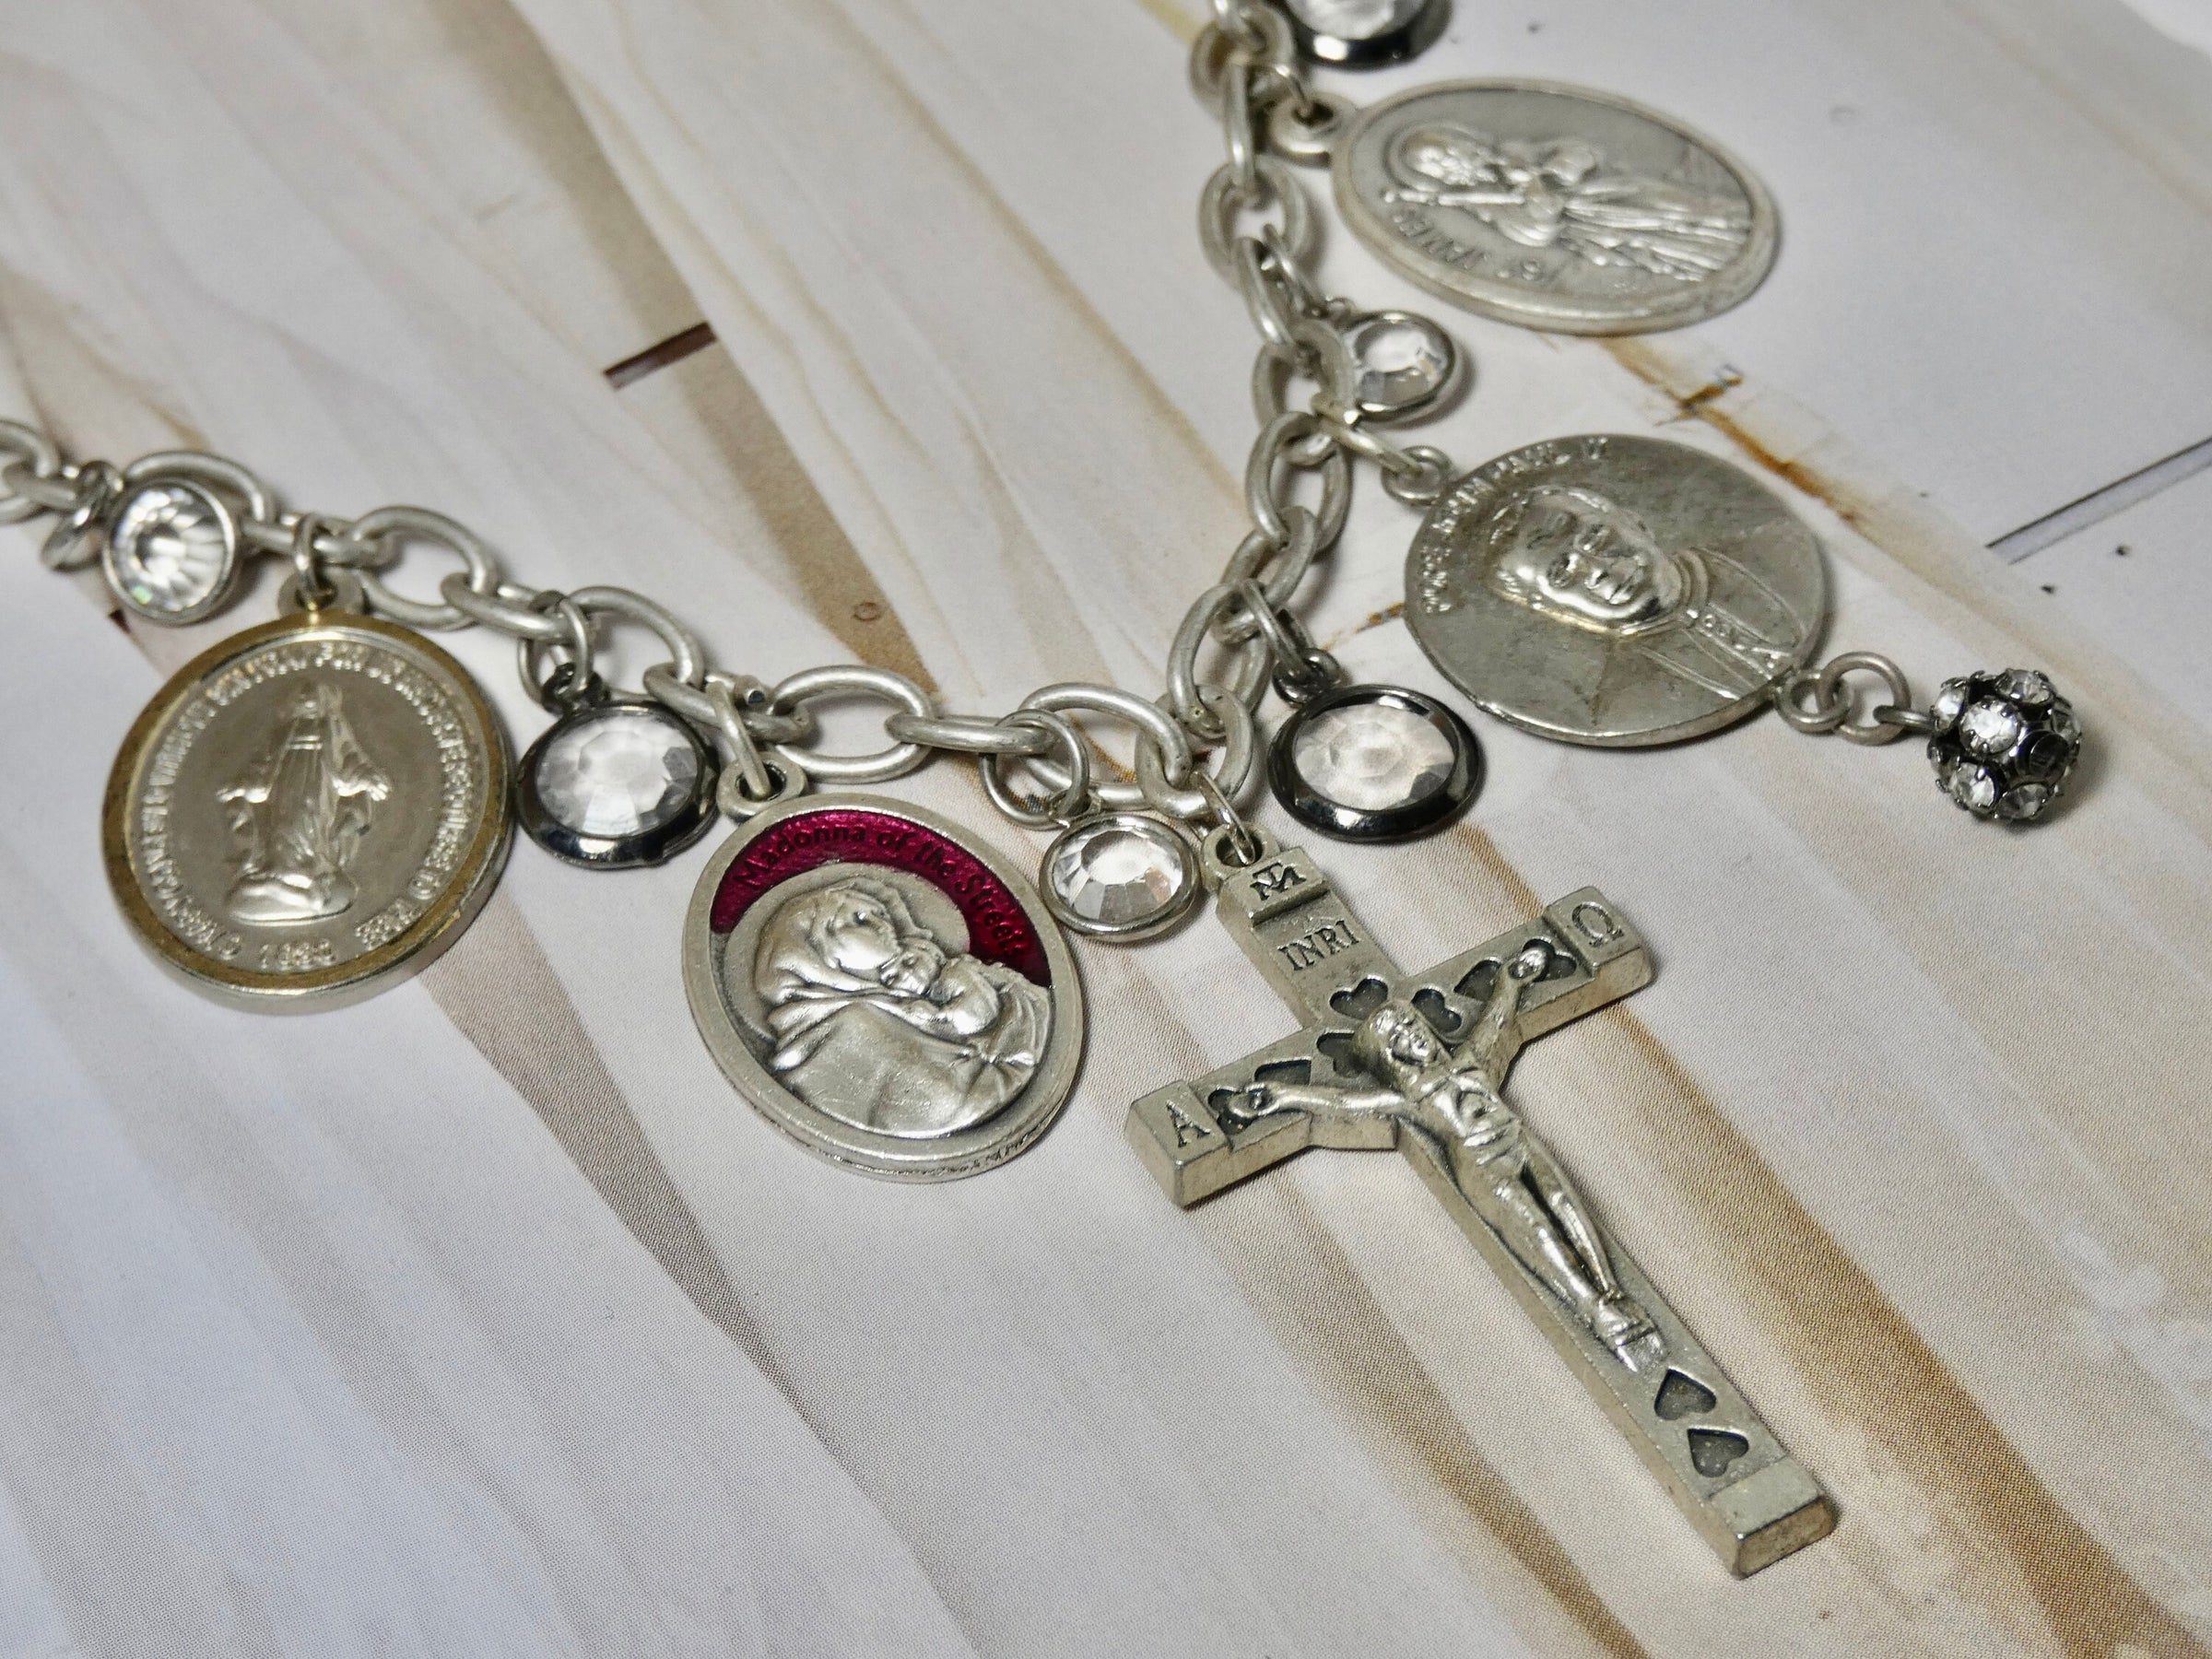 Vintage Cross and Medallion Charm Necklace, One of a Kind Assemblage repurposed christian medals